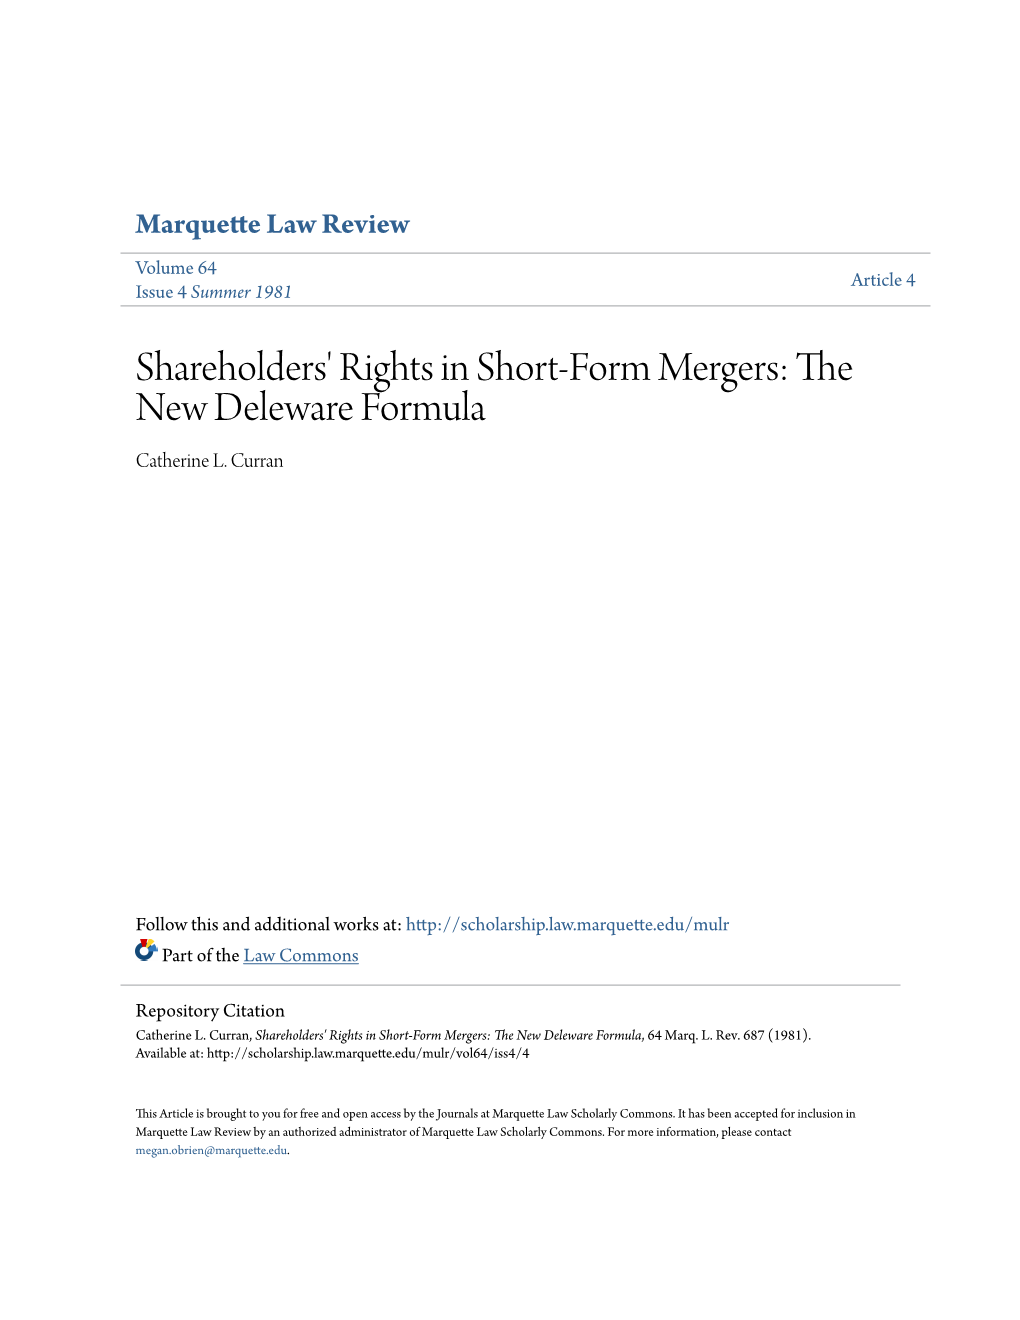 Shareholders' Rights in Short-Form Mergers: the New Deleware Formula Catherine L